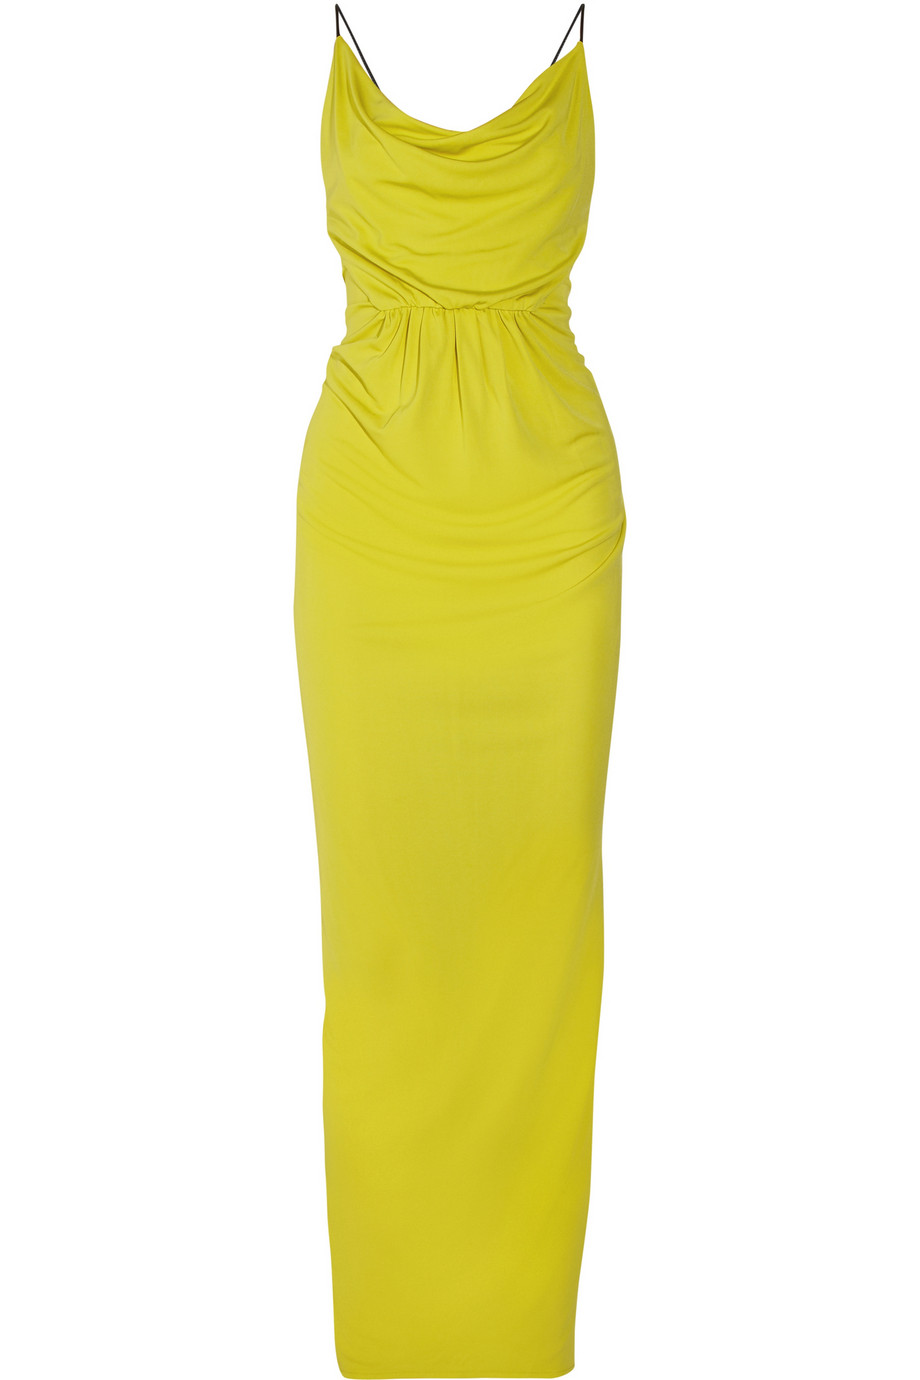 Lyst - Cut25 by yigal azrouël Crepejersey Maxi Dress in Yellow